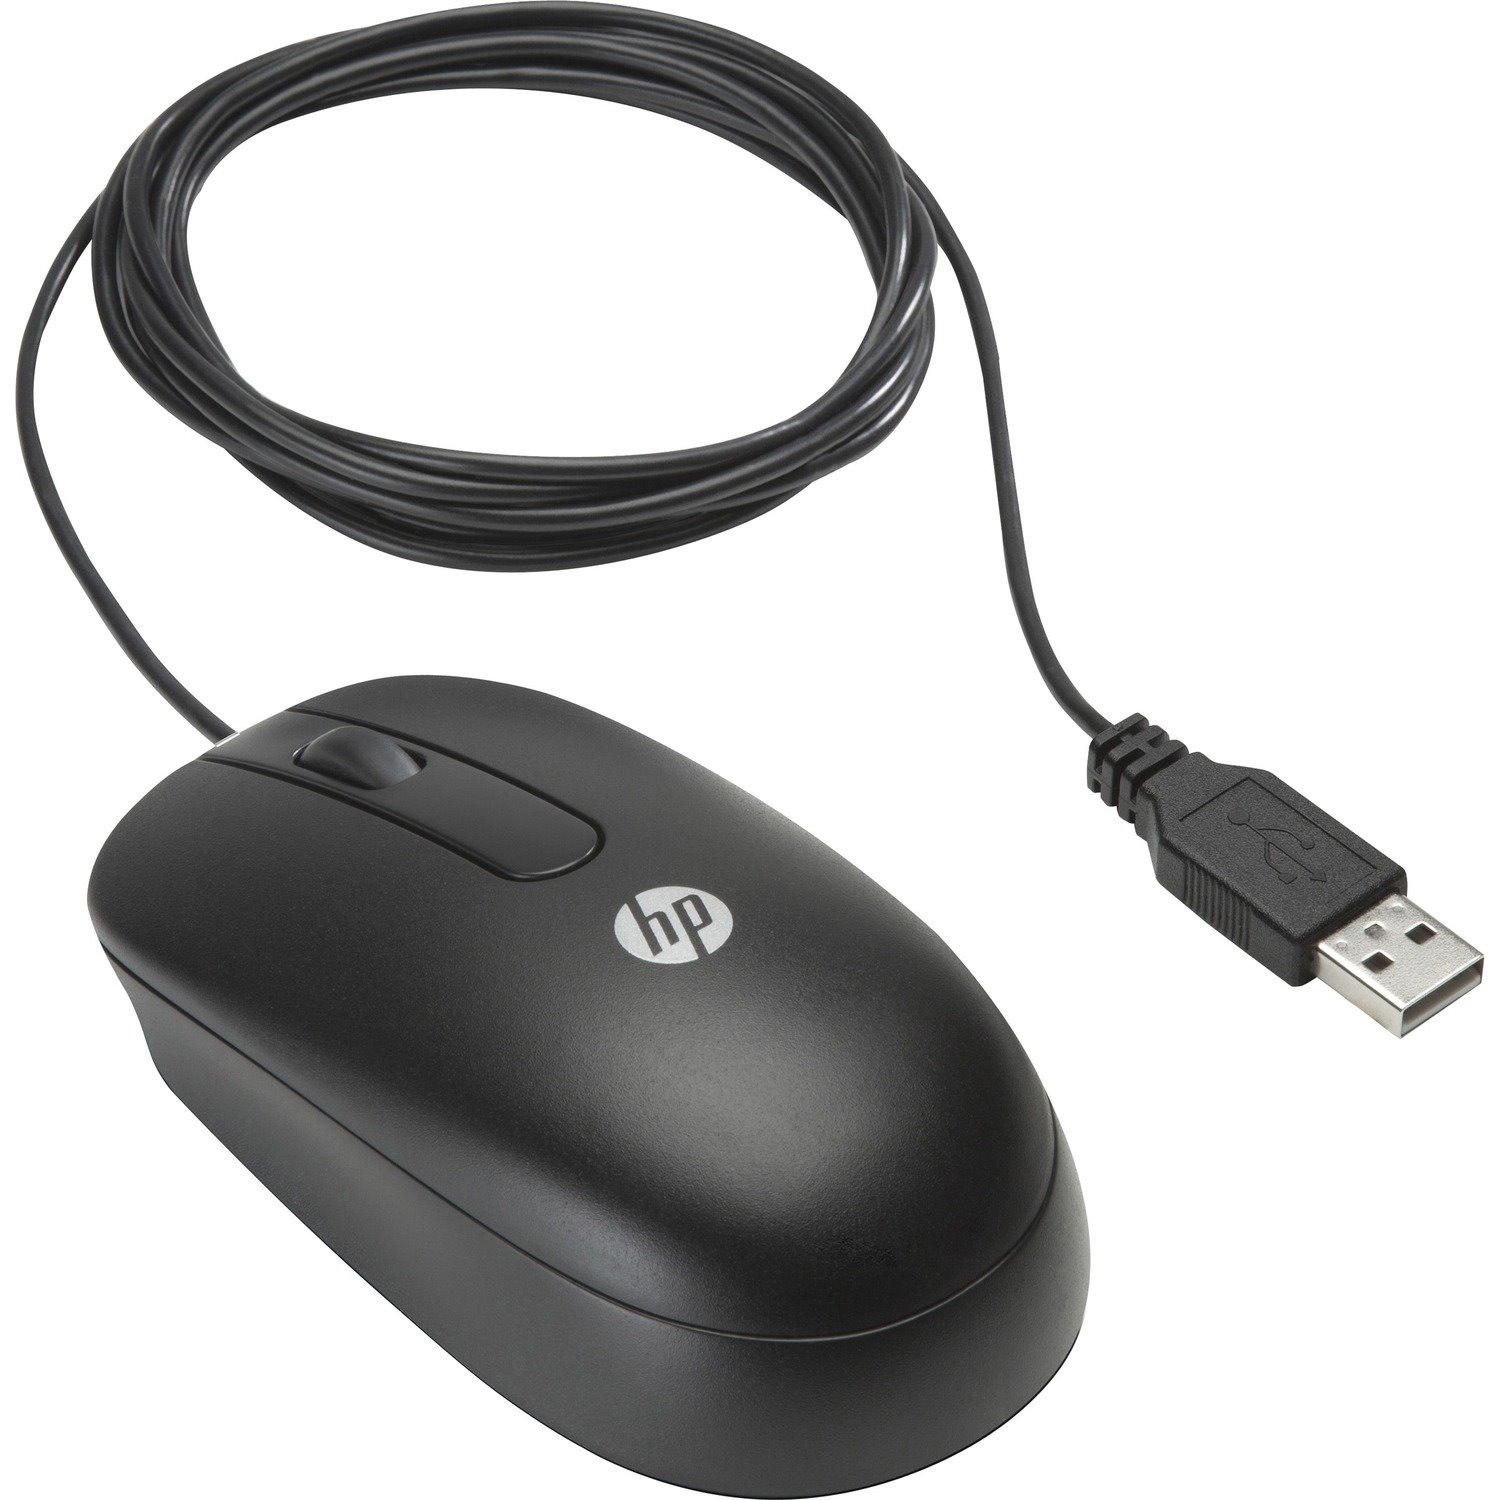 HP Mouse - USB - Optical - 3 Button(s) - Black - 1 Pack